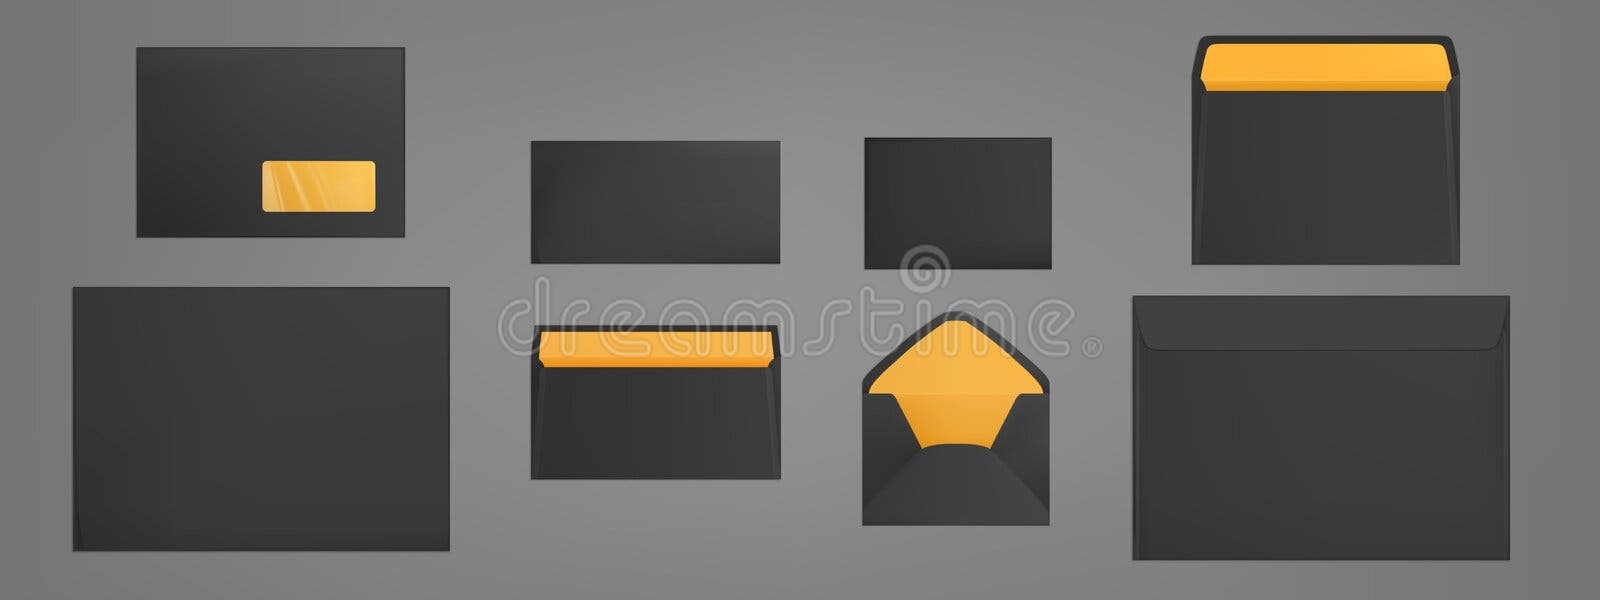 Black Envelopes Luxury Dark Template Of A4 Business Letters